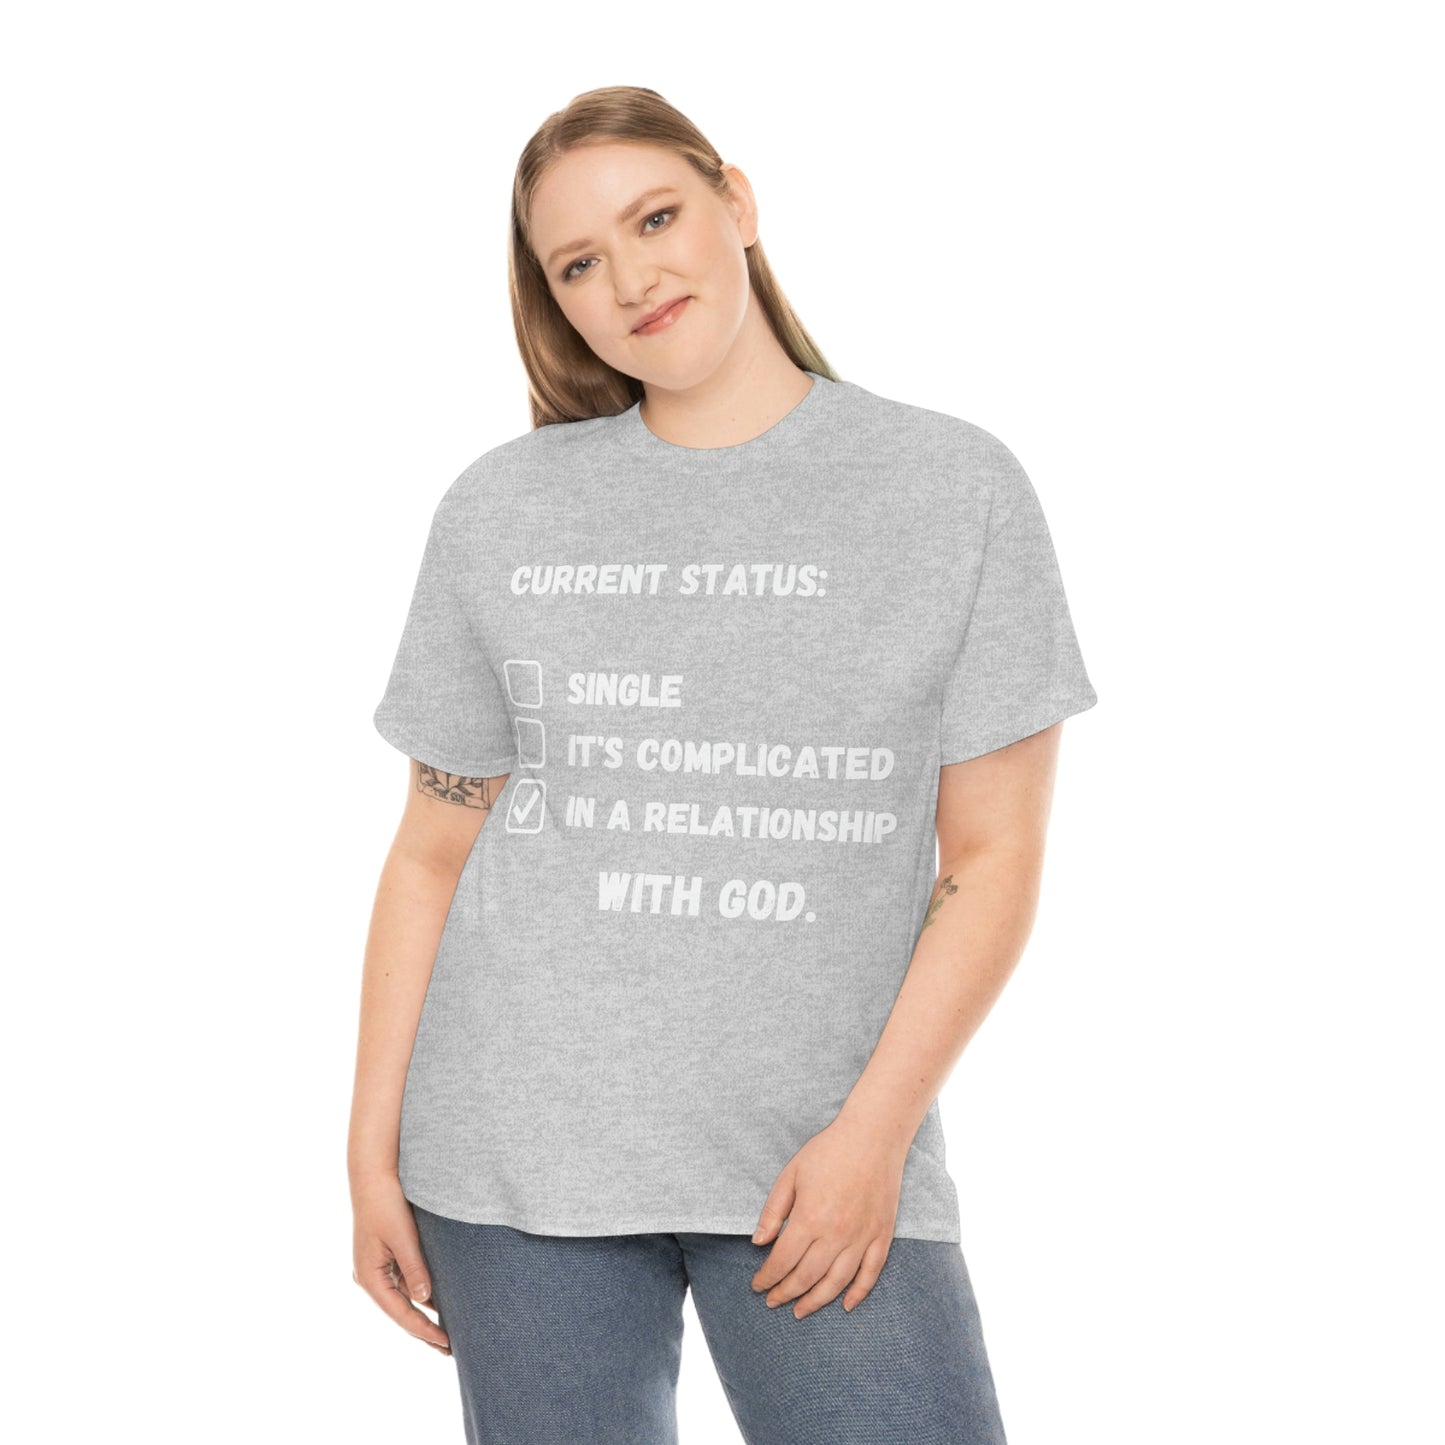 In A relationship with GOD. T-Shirt